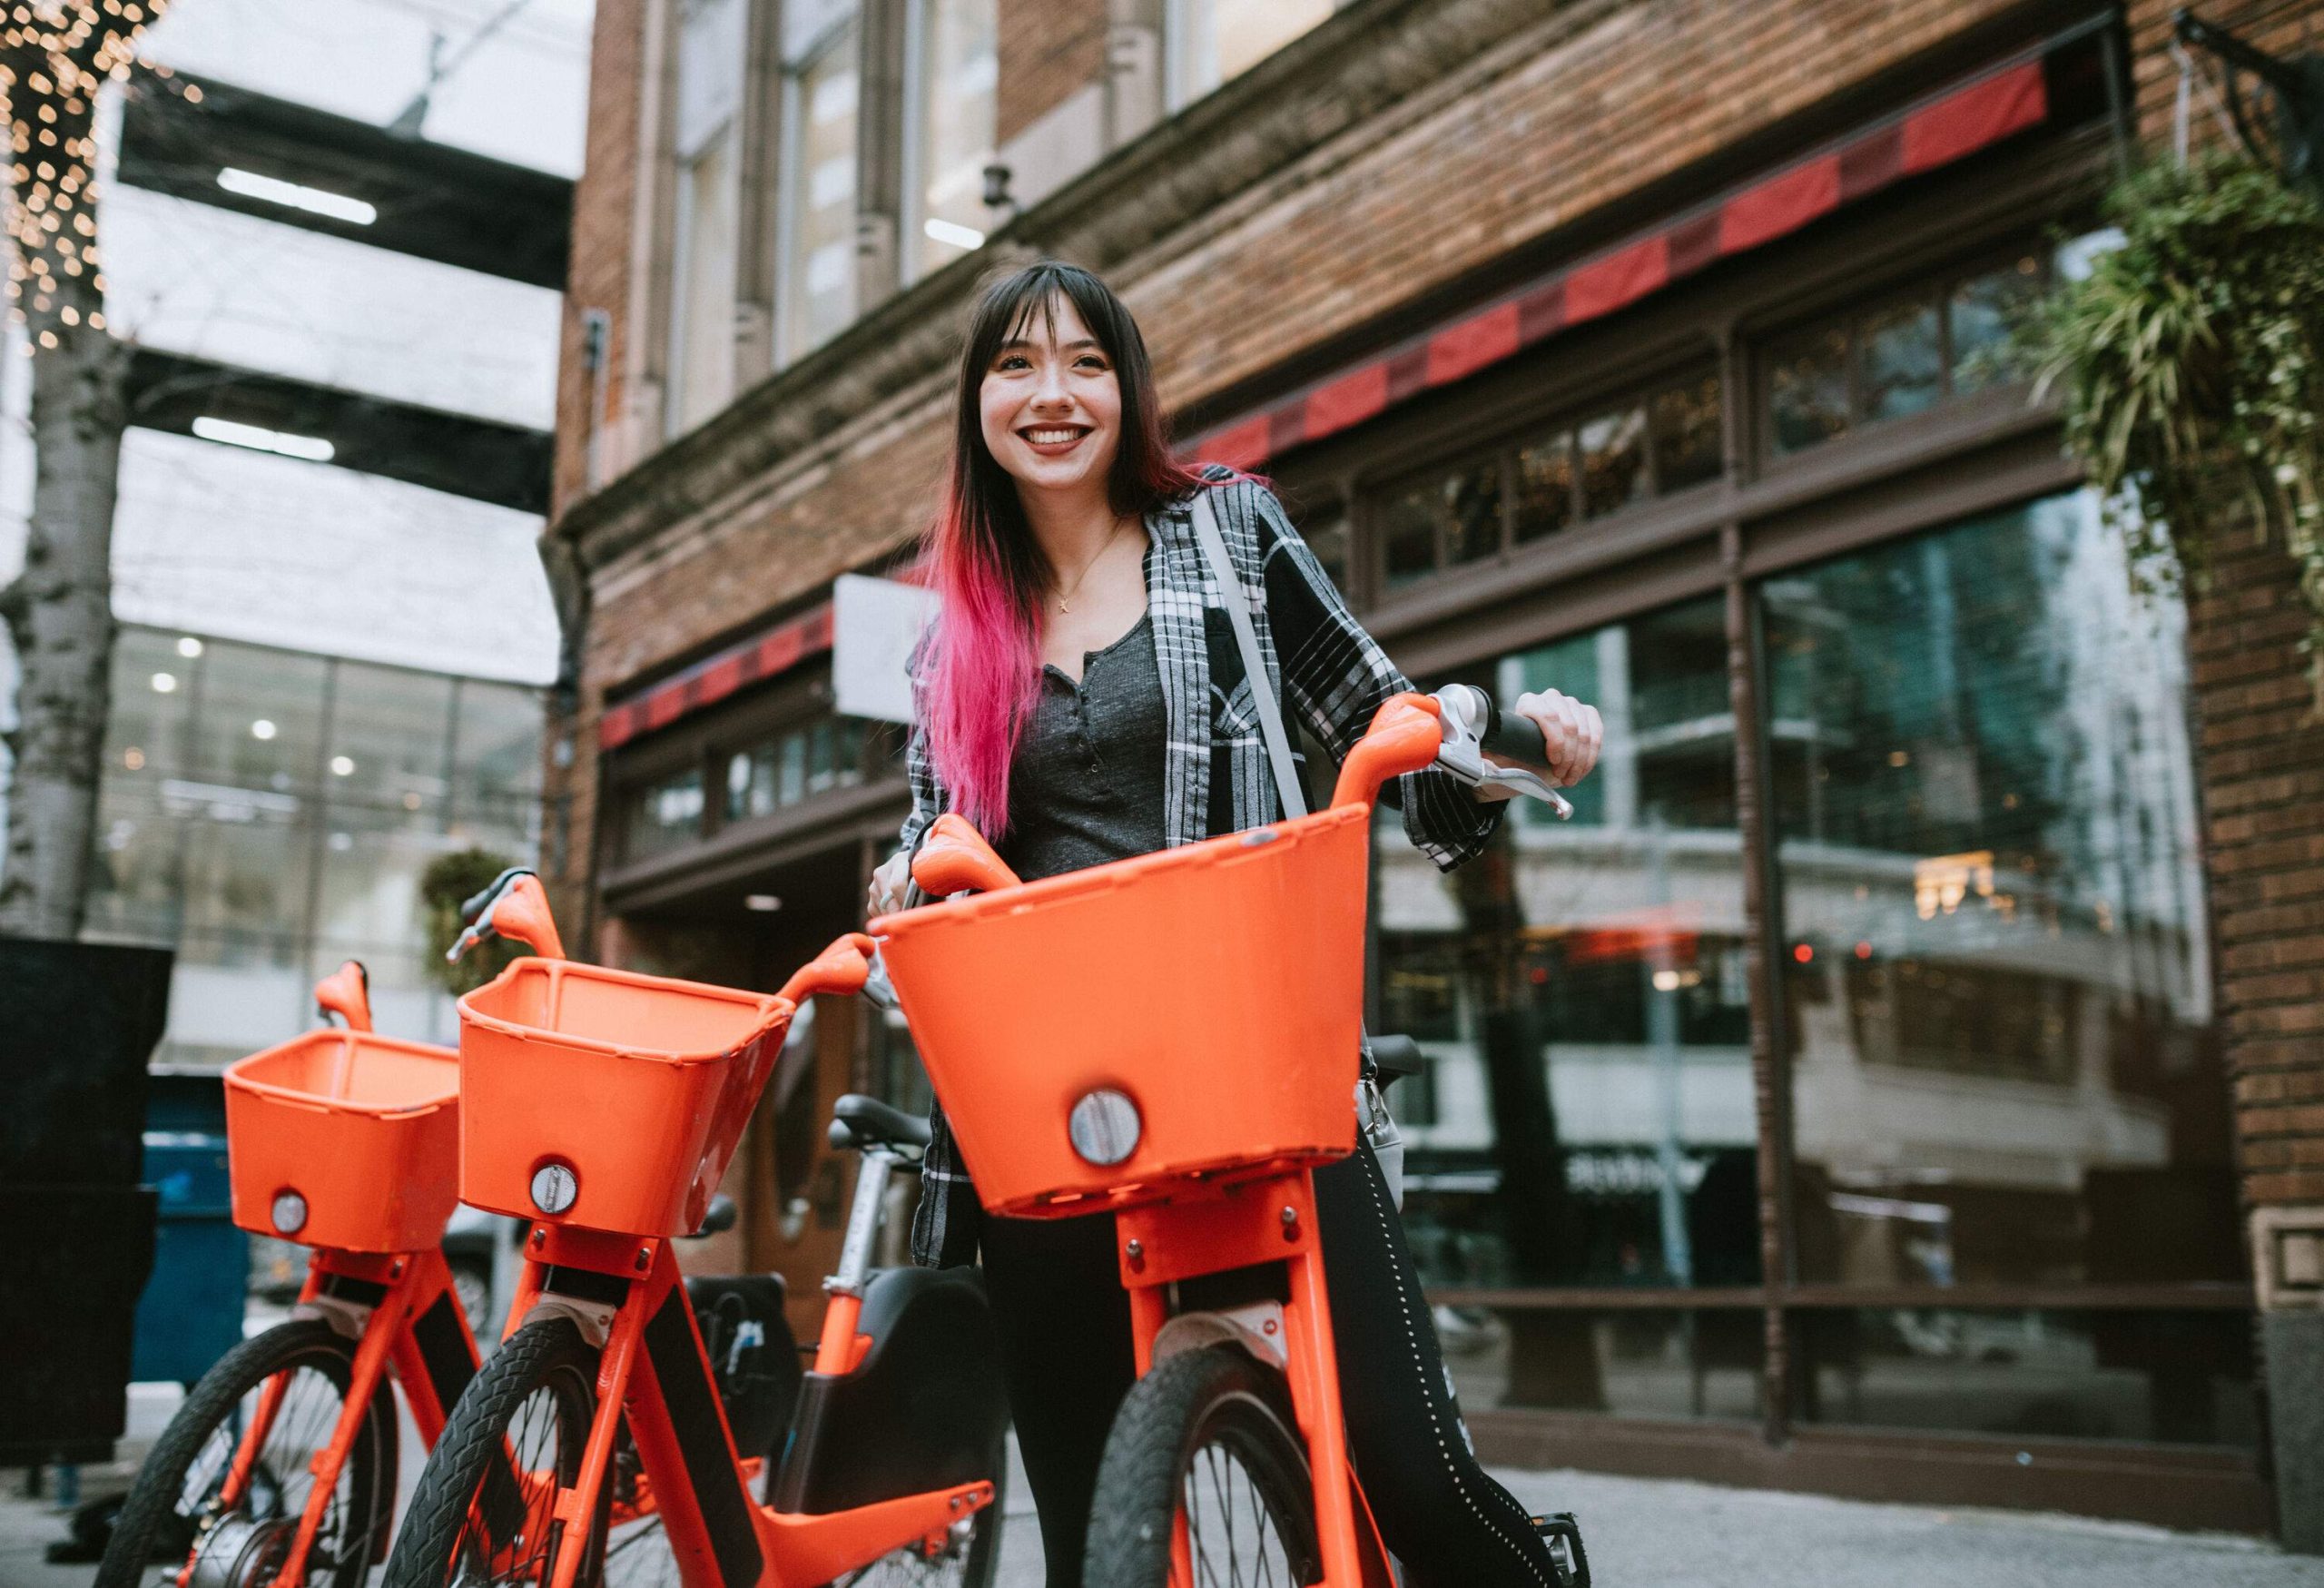 A young lady tourist rides an orange bicycle to go around the city.